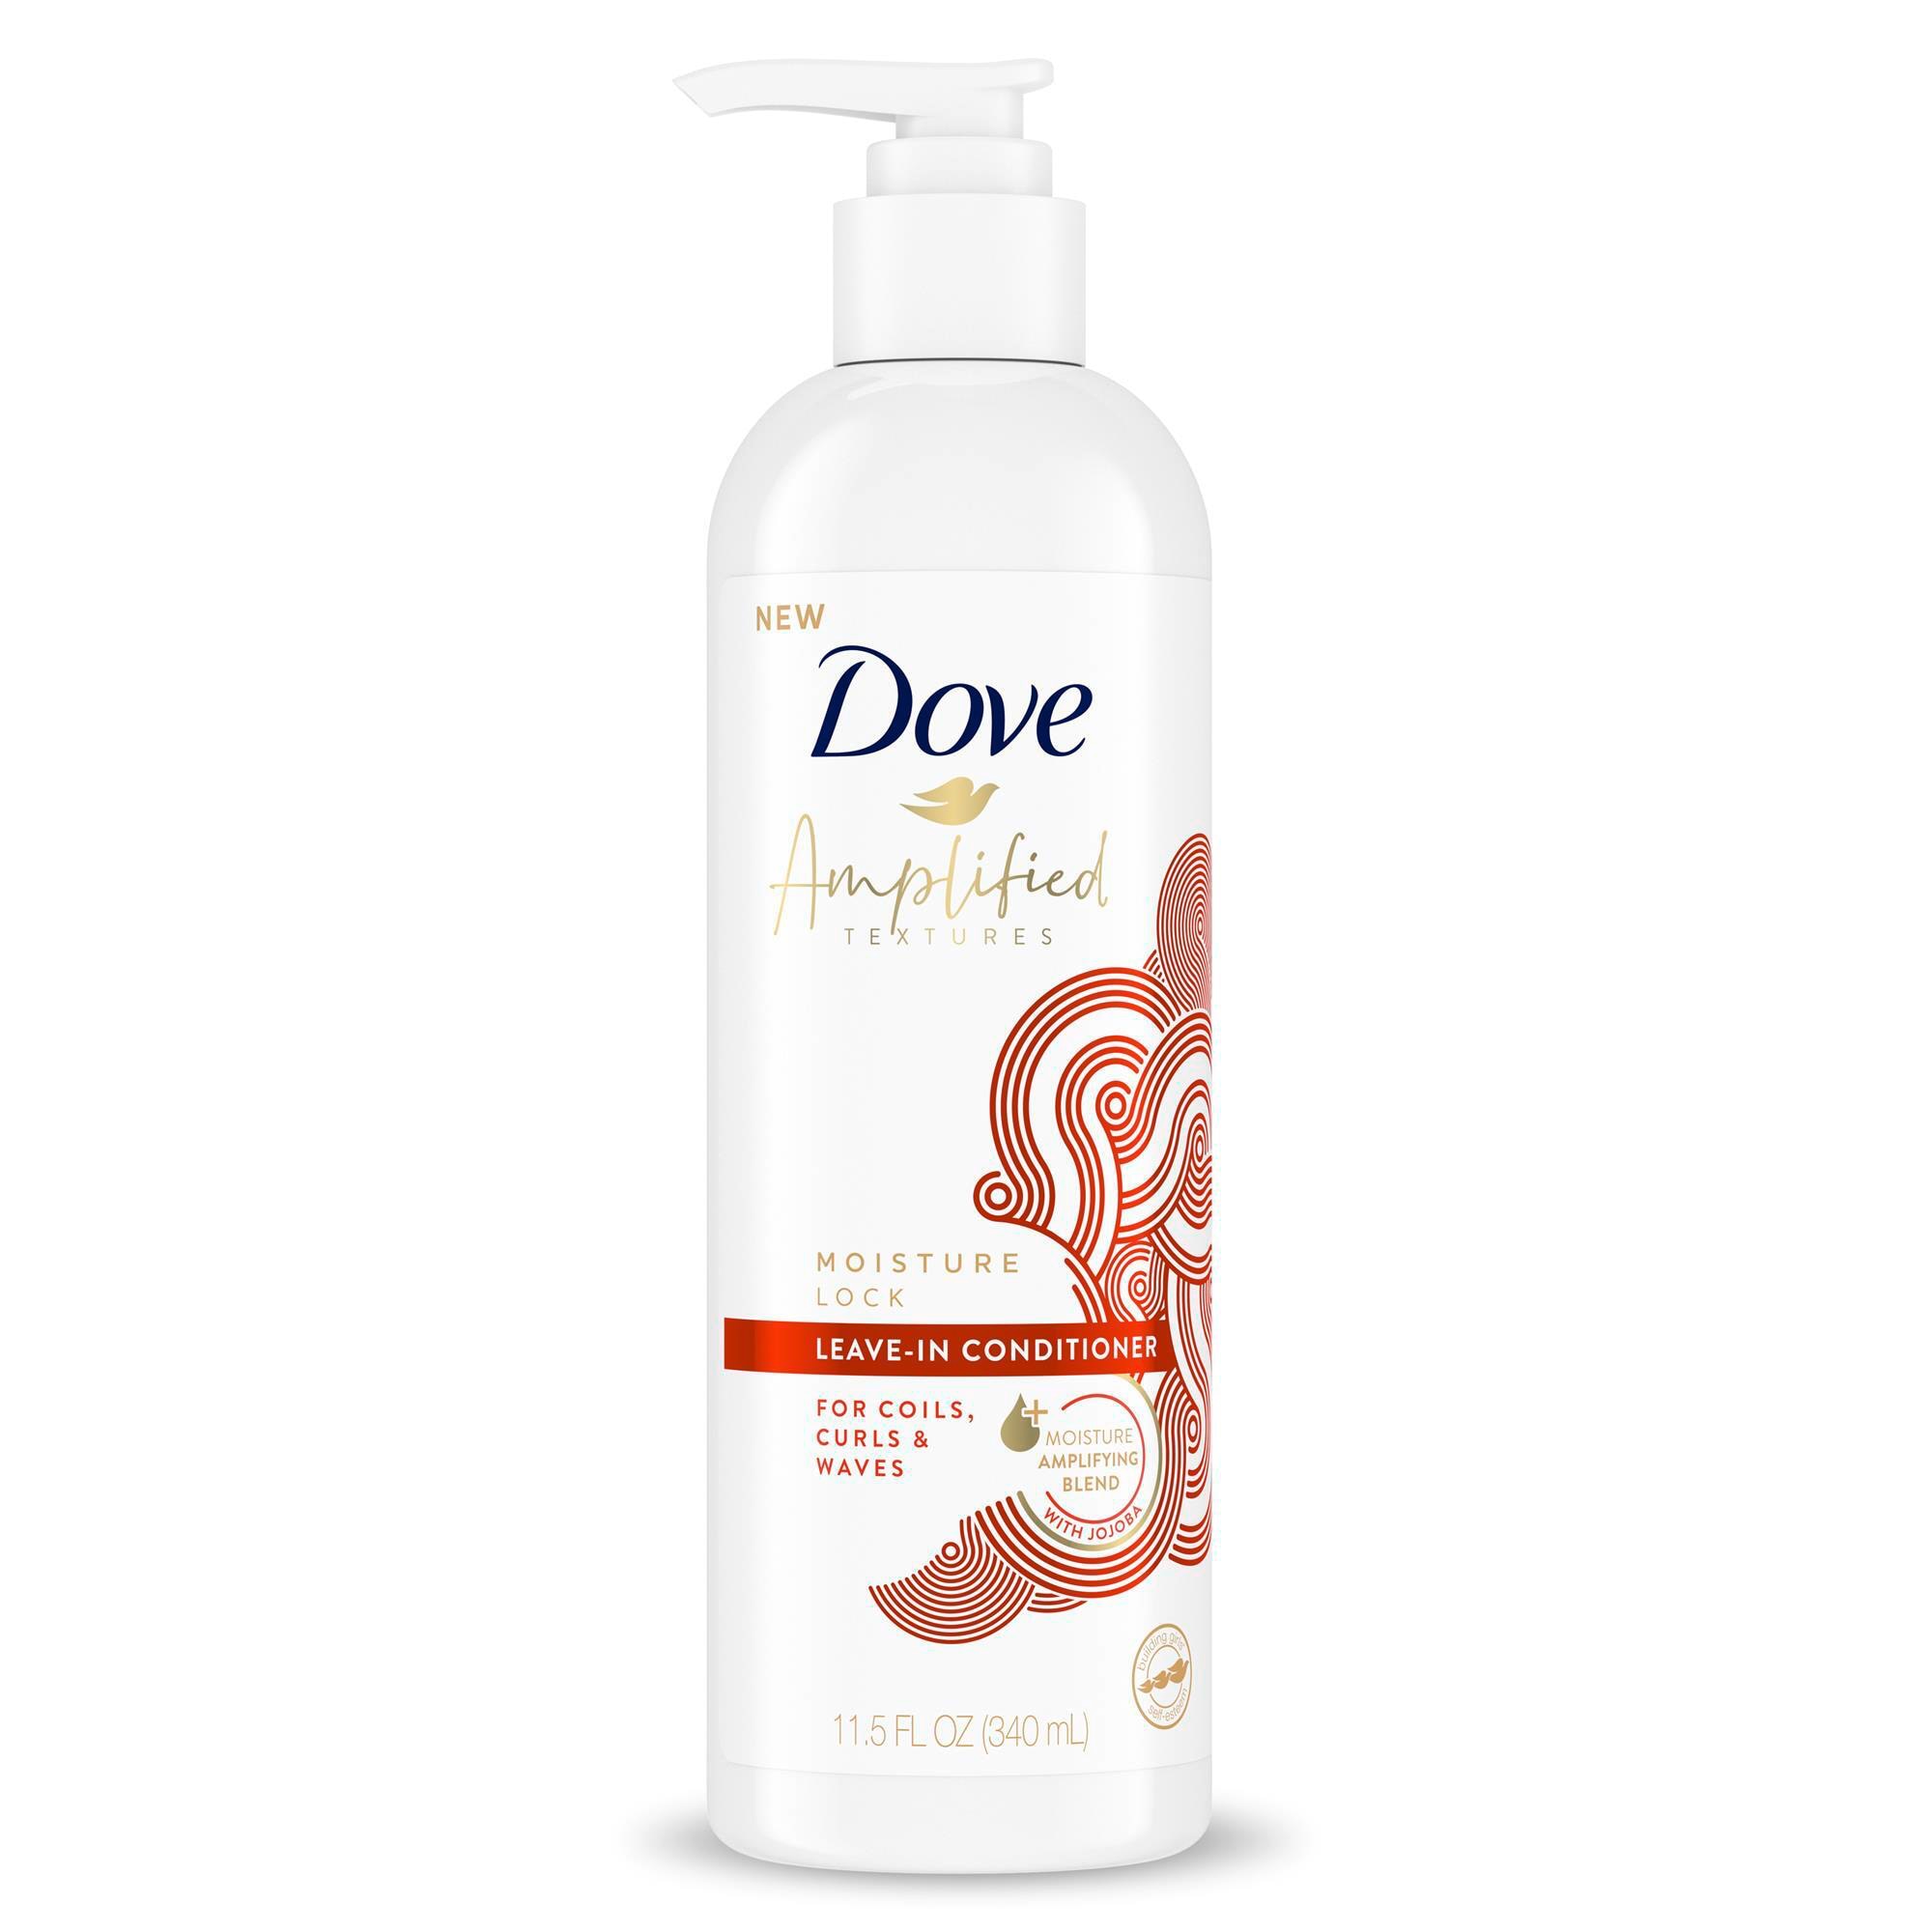 Dove Amplified Textures Moisture Lock with Moisture Amplifying blend Leave-In Conditioner for curly hair 340 ml